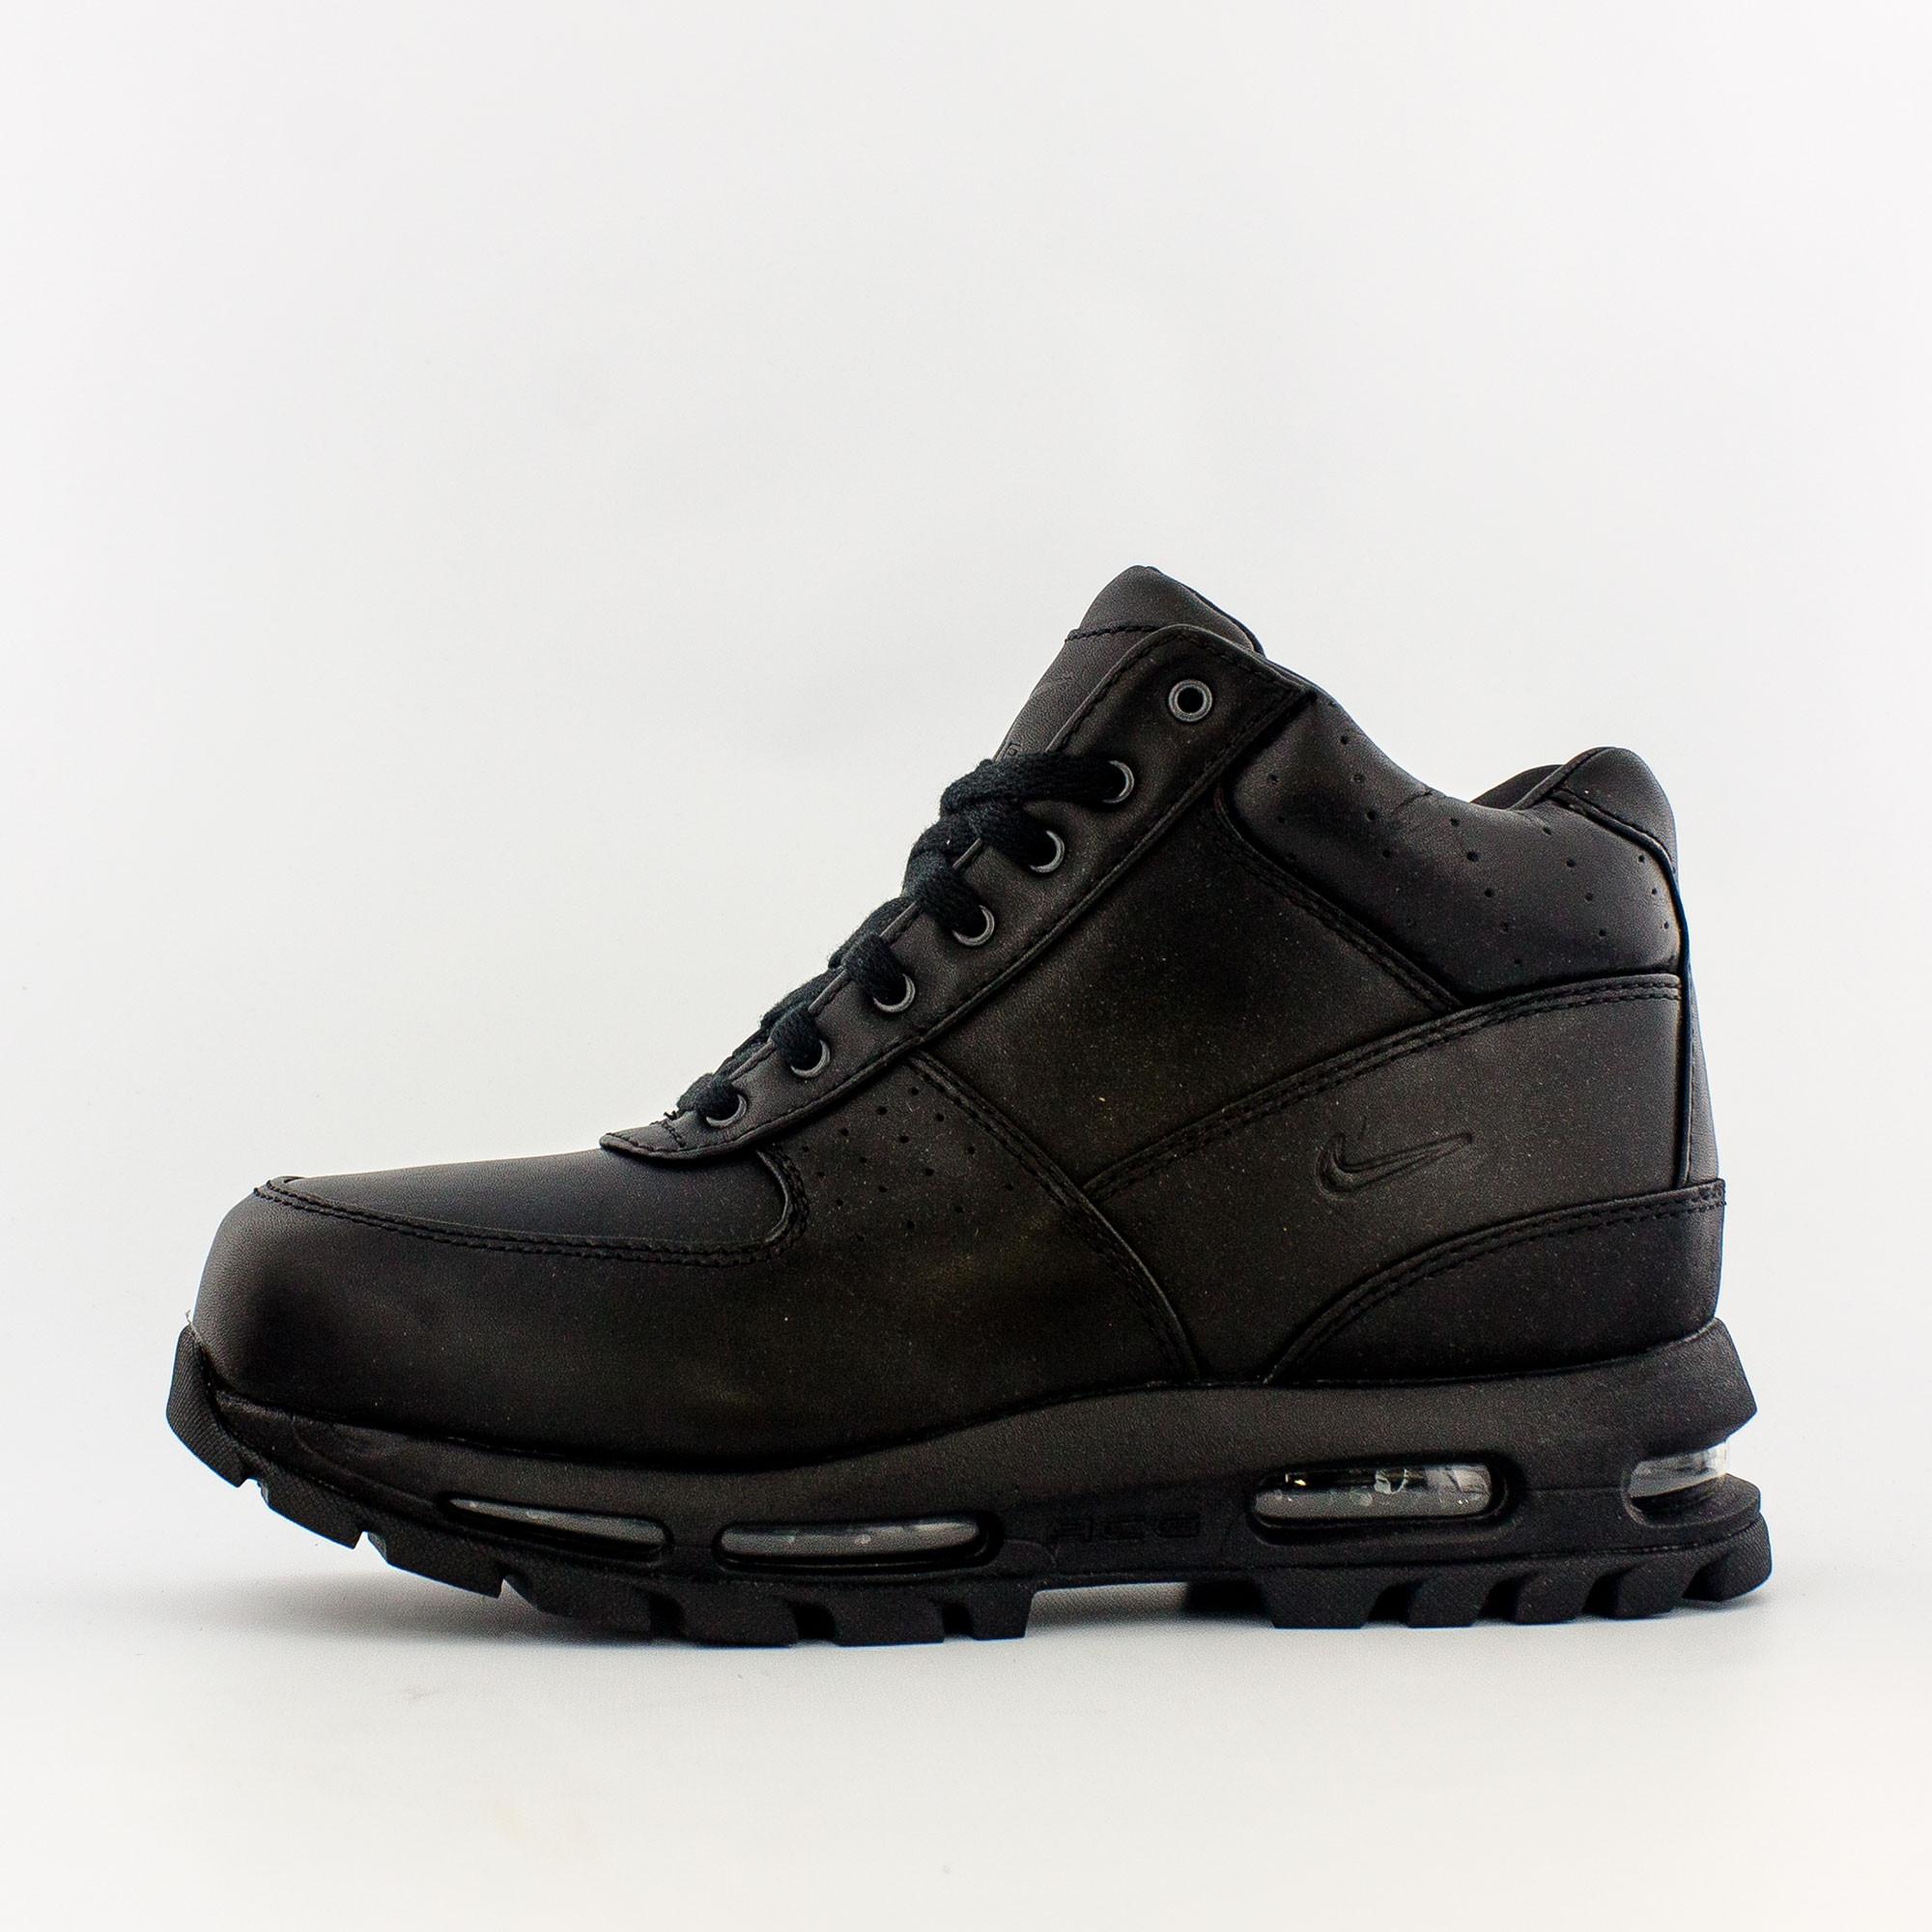 Nike Leather Air Max Goadome In Anthracite Black For Men Lyst